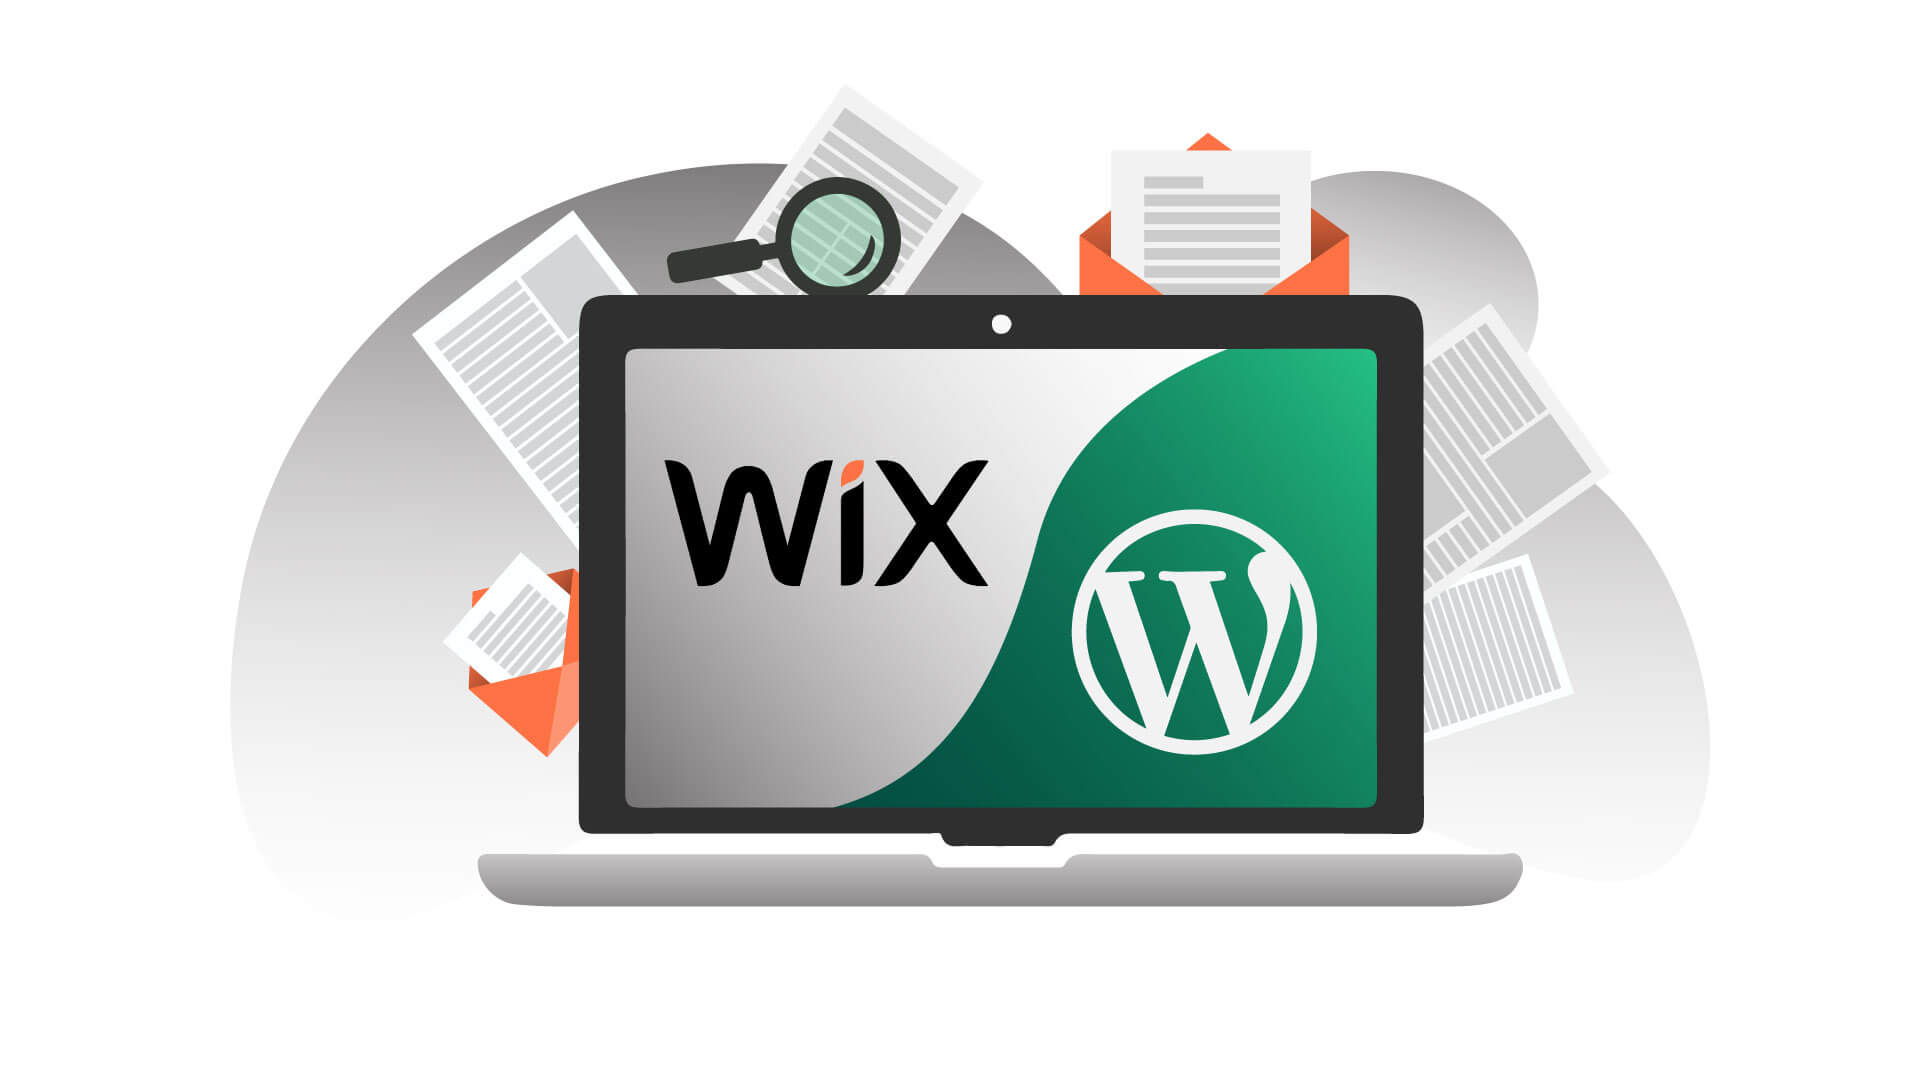 Wix vs WordPress for SEO, which one is better?